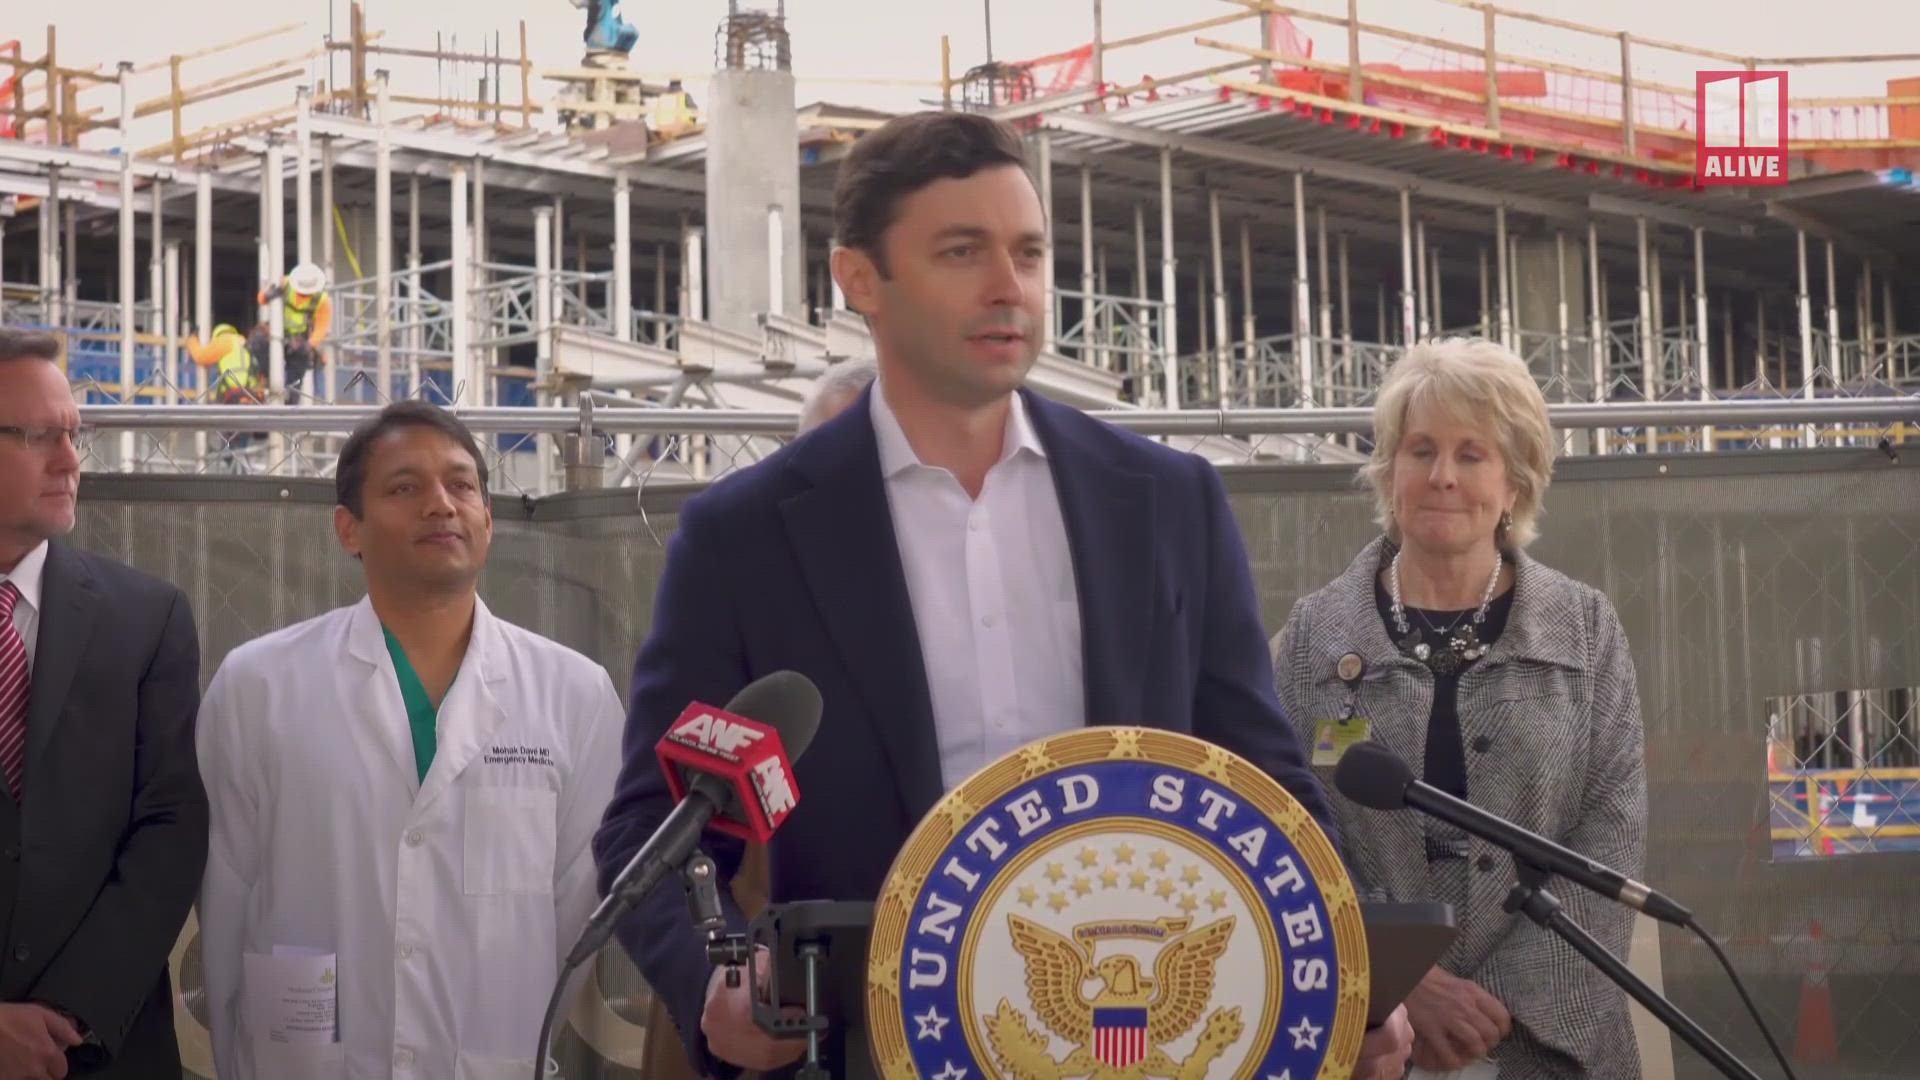 Sen. Jon Ossoff visited the Gainesville facility on Wednesday to announce his initiative to bring the medical center a helipad.